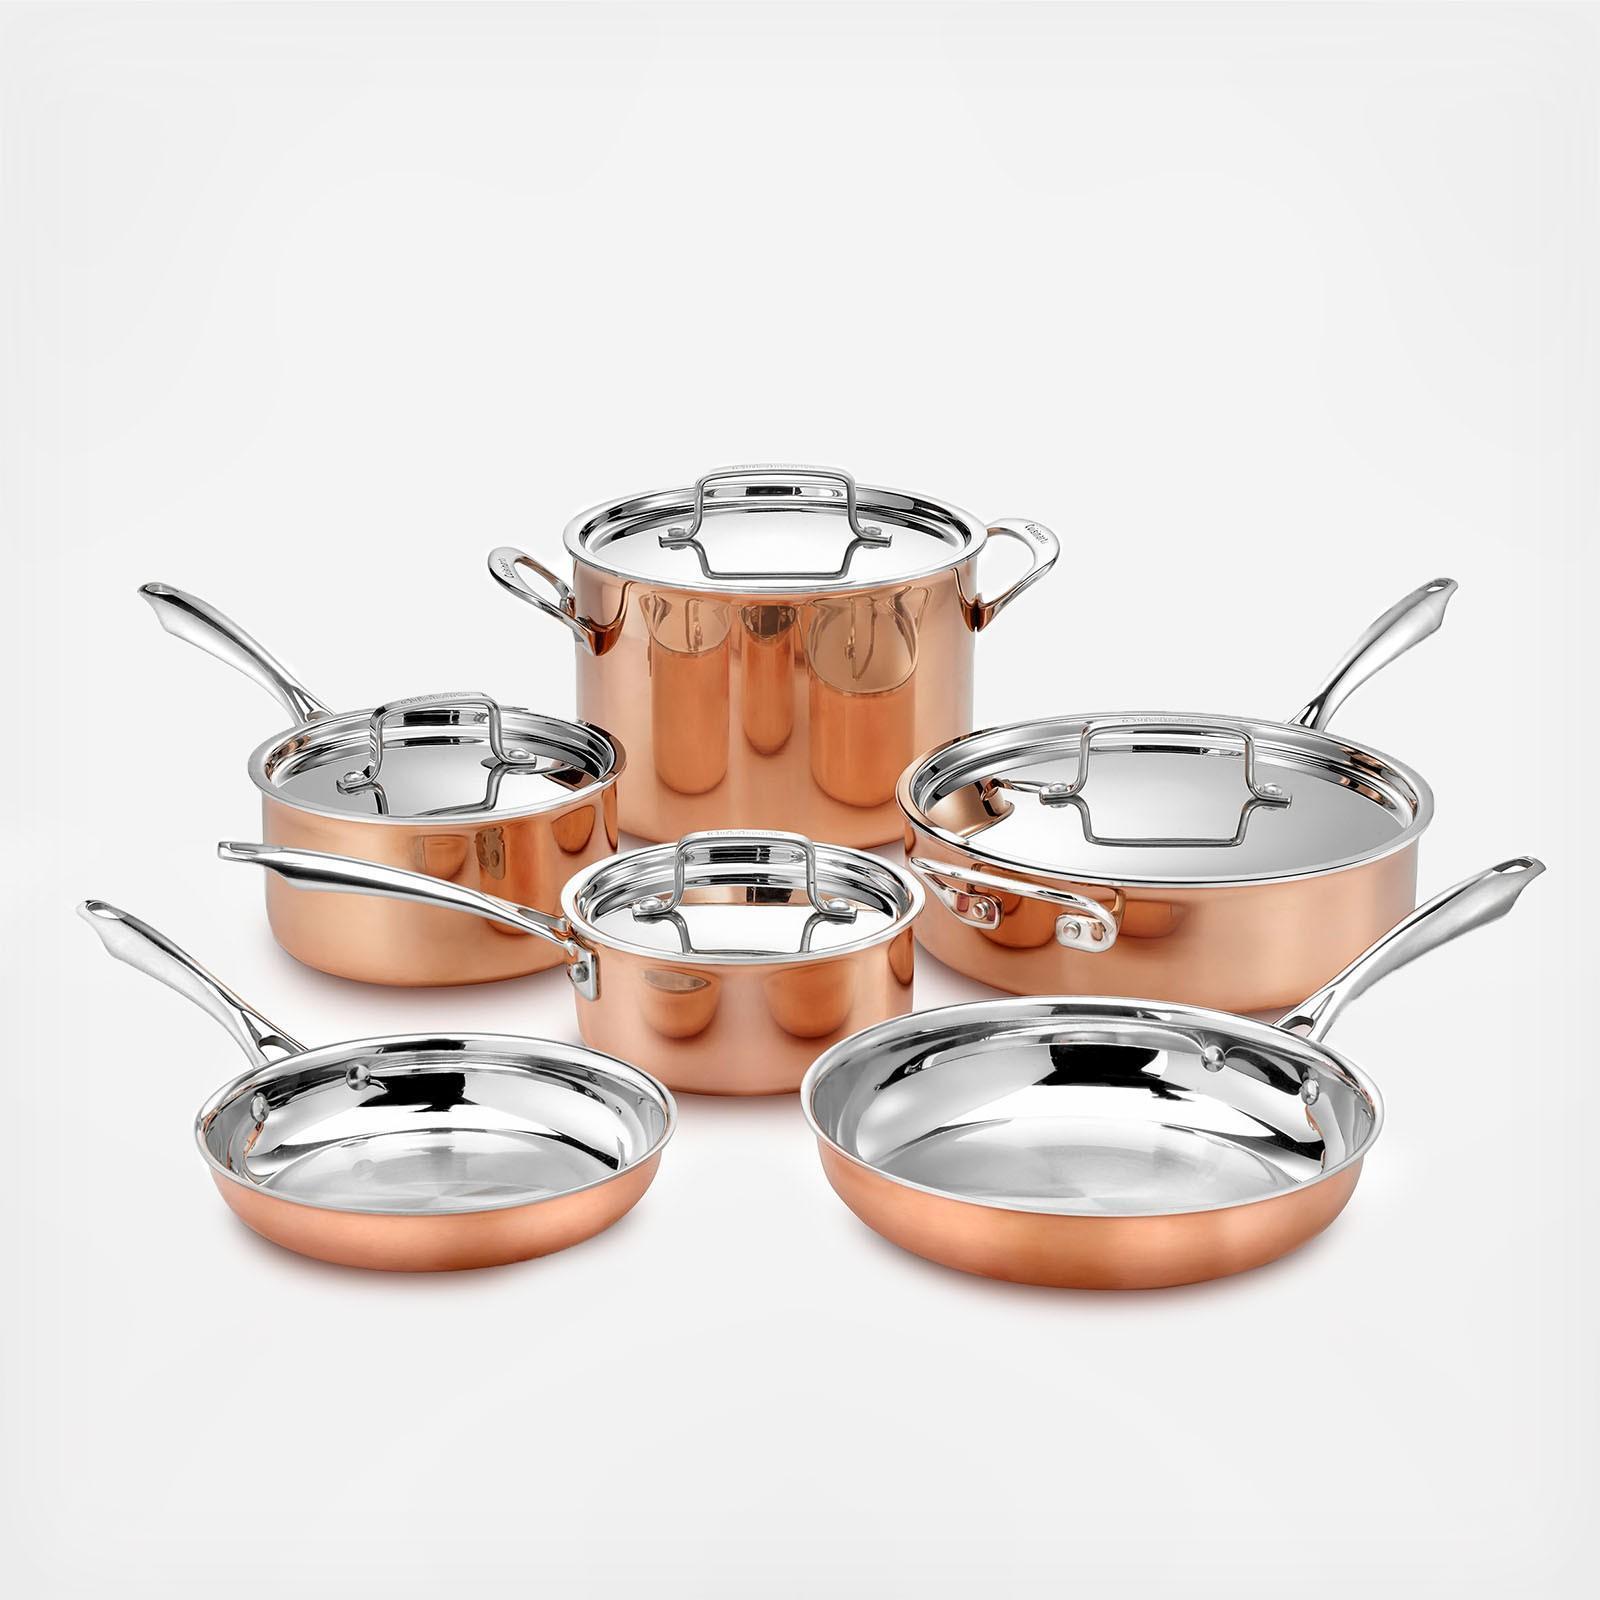 Cuisinart hammered tri ply stainless steel 9 piece cookware set Cuisinart Tri Ply Copper 10 Piece Cookware Set Zola